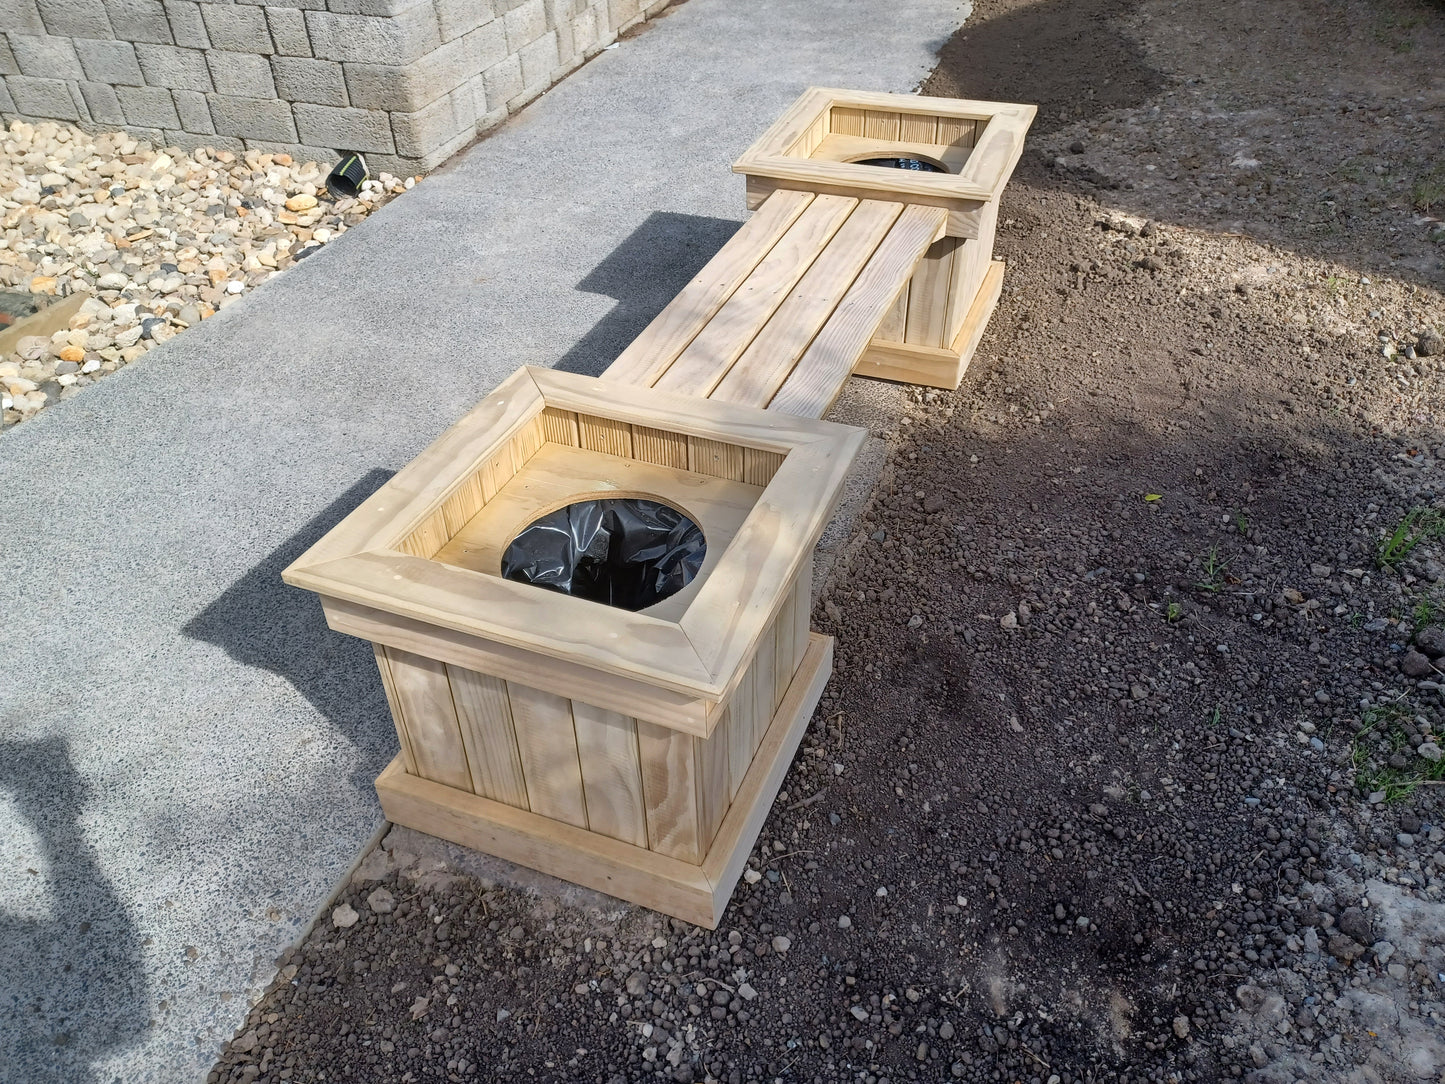 Planter boxes with bench seat